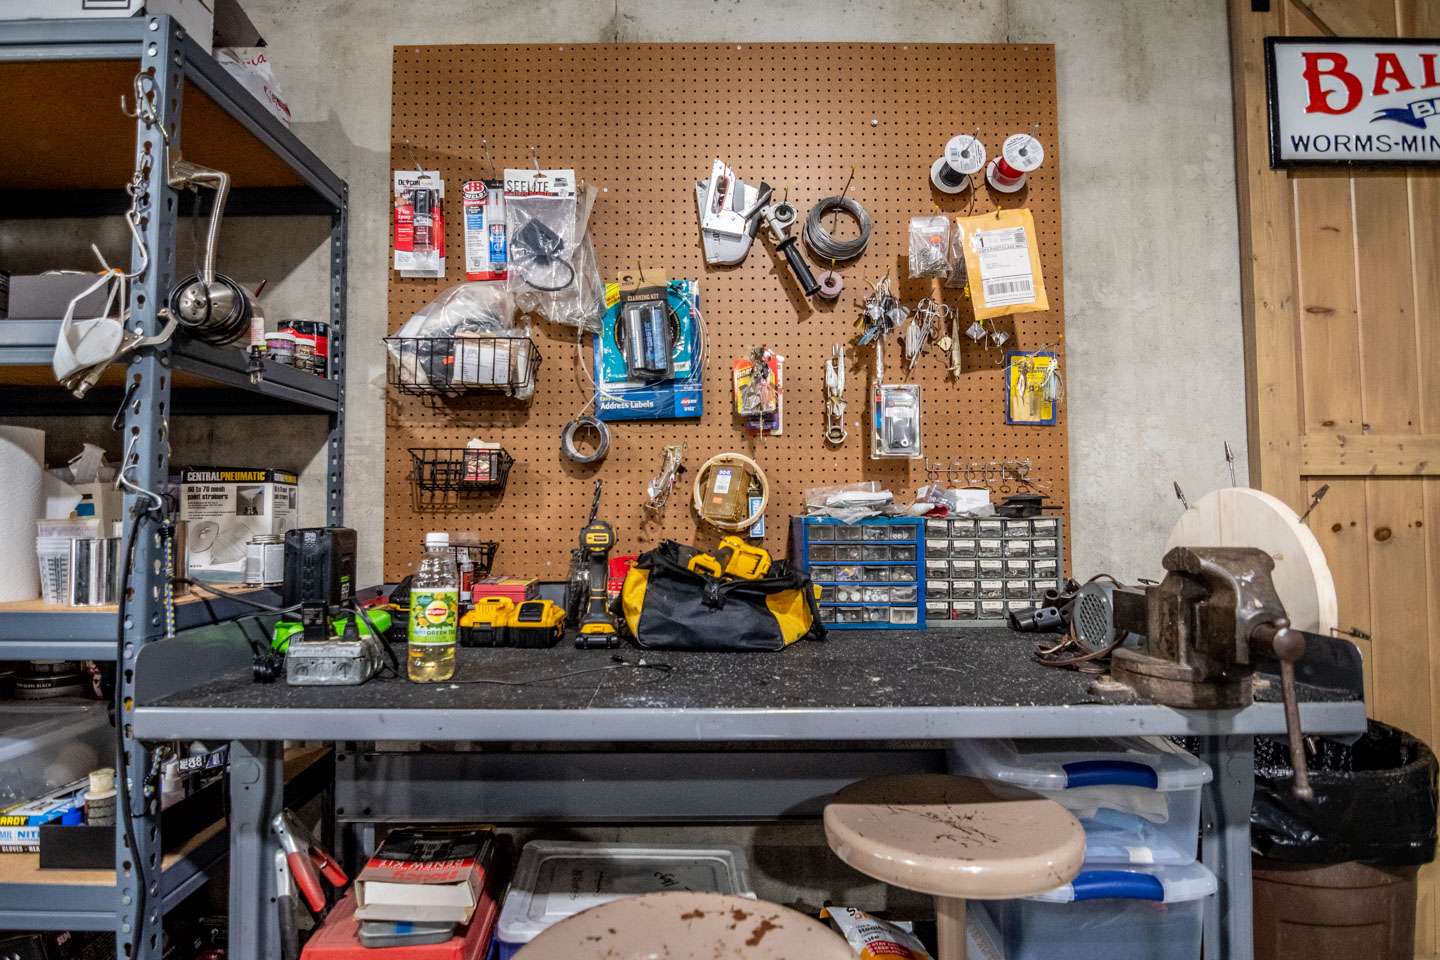 For a gearhead like Auten, the workbench is a must. This is the area he uses as a workshop to customize lures and paint baits.